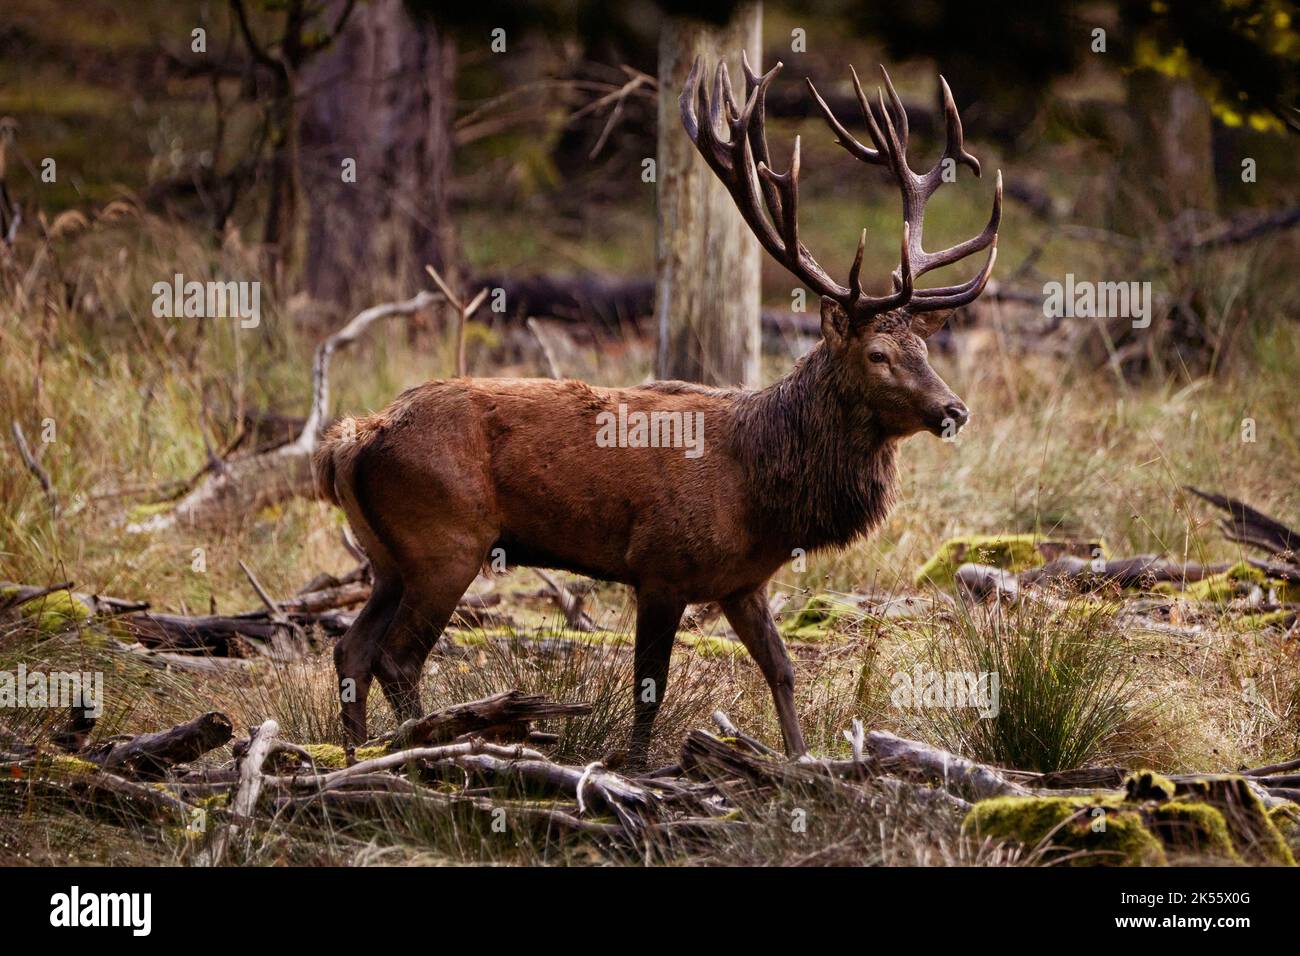 Deer with large antlers in forest Stock Photo